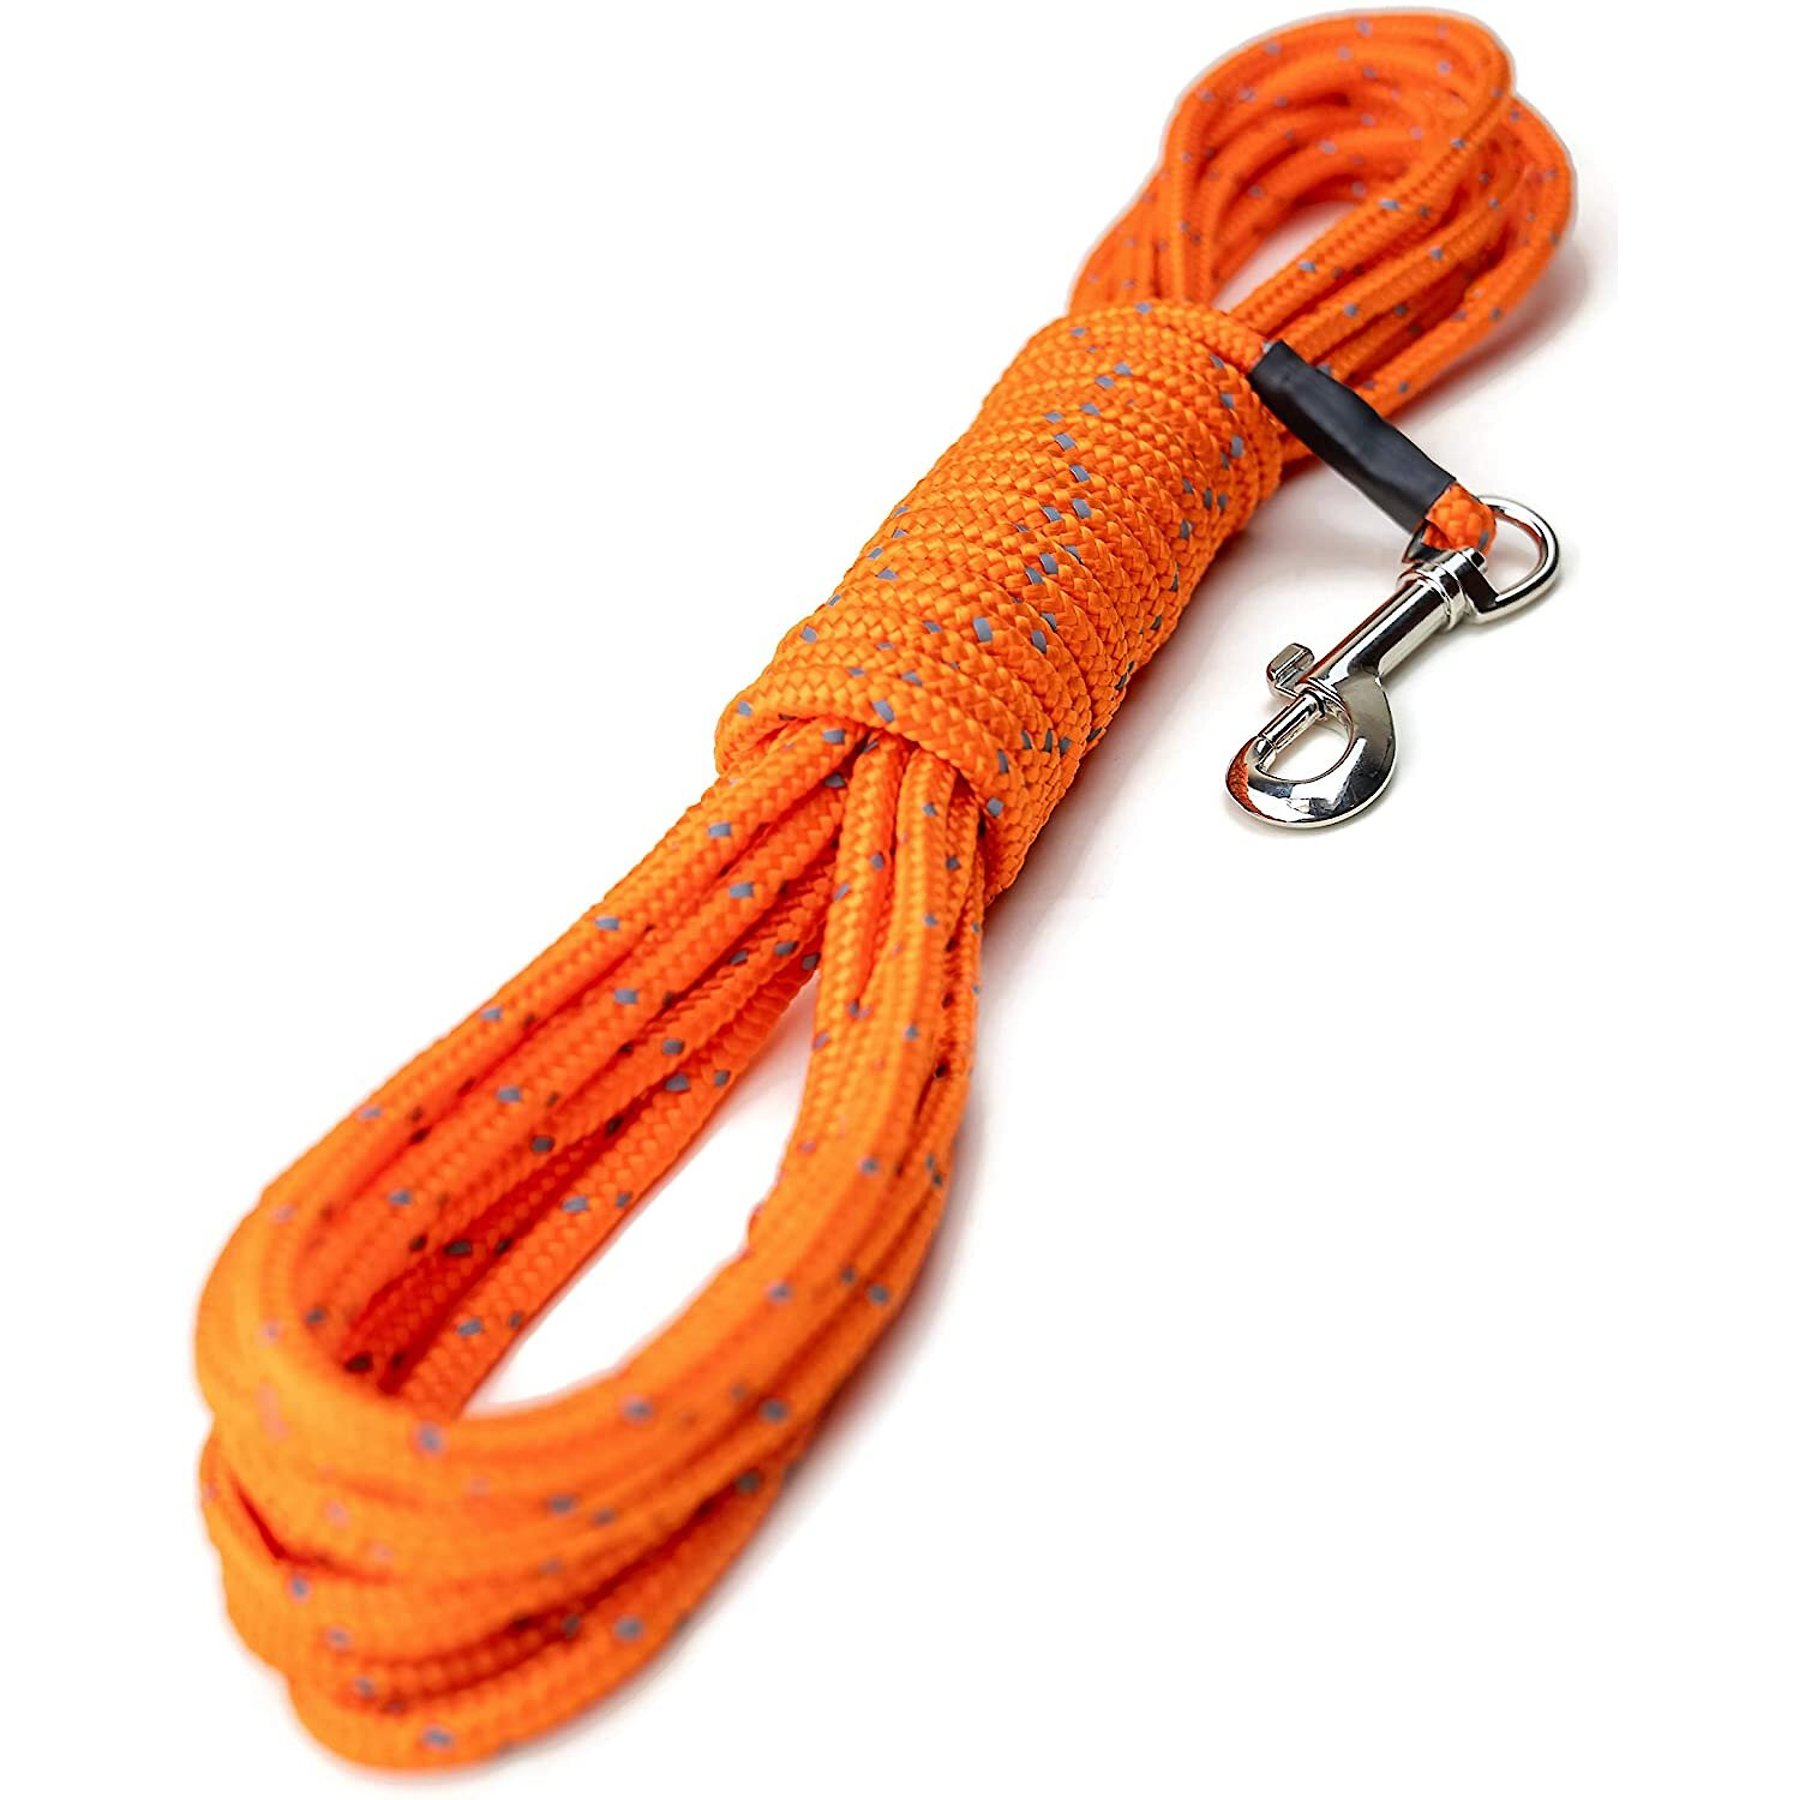 Downtown Pet Supply Dog/Puppy Obedience Recall Training Agility Lead, Orange, 30 Foot